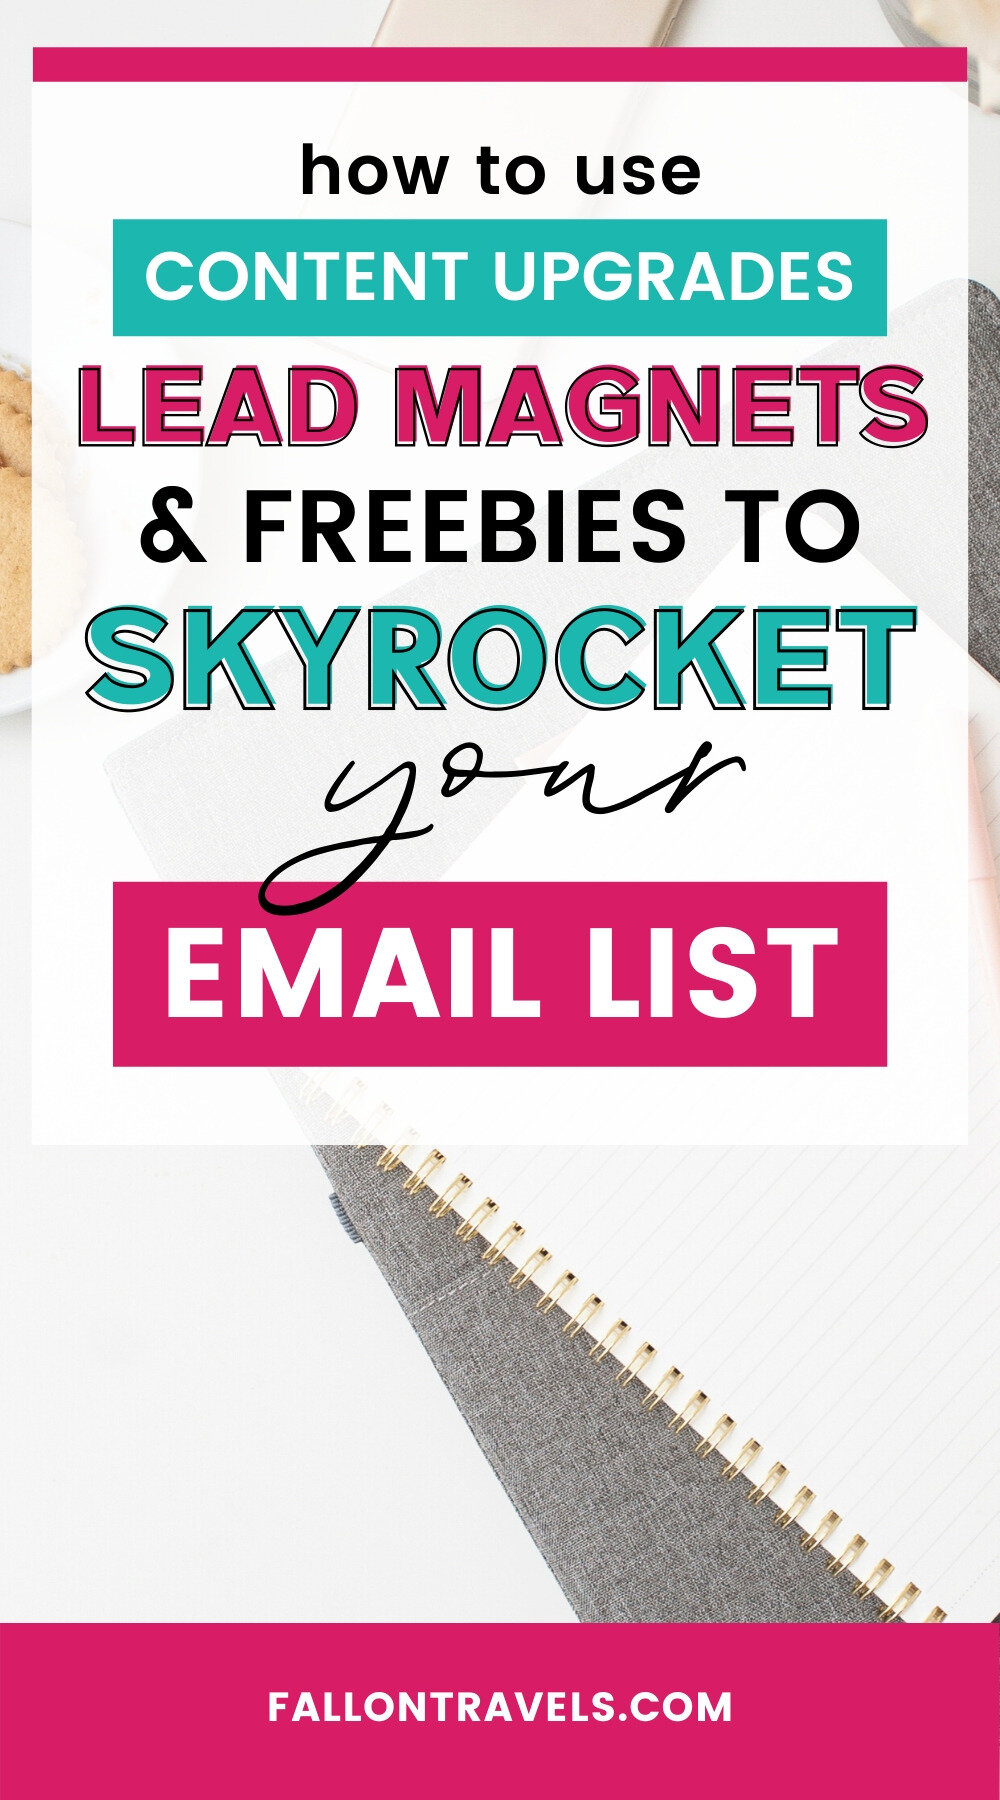 How to grow your email list with Content Upgrades (Opt in freebies)